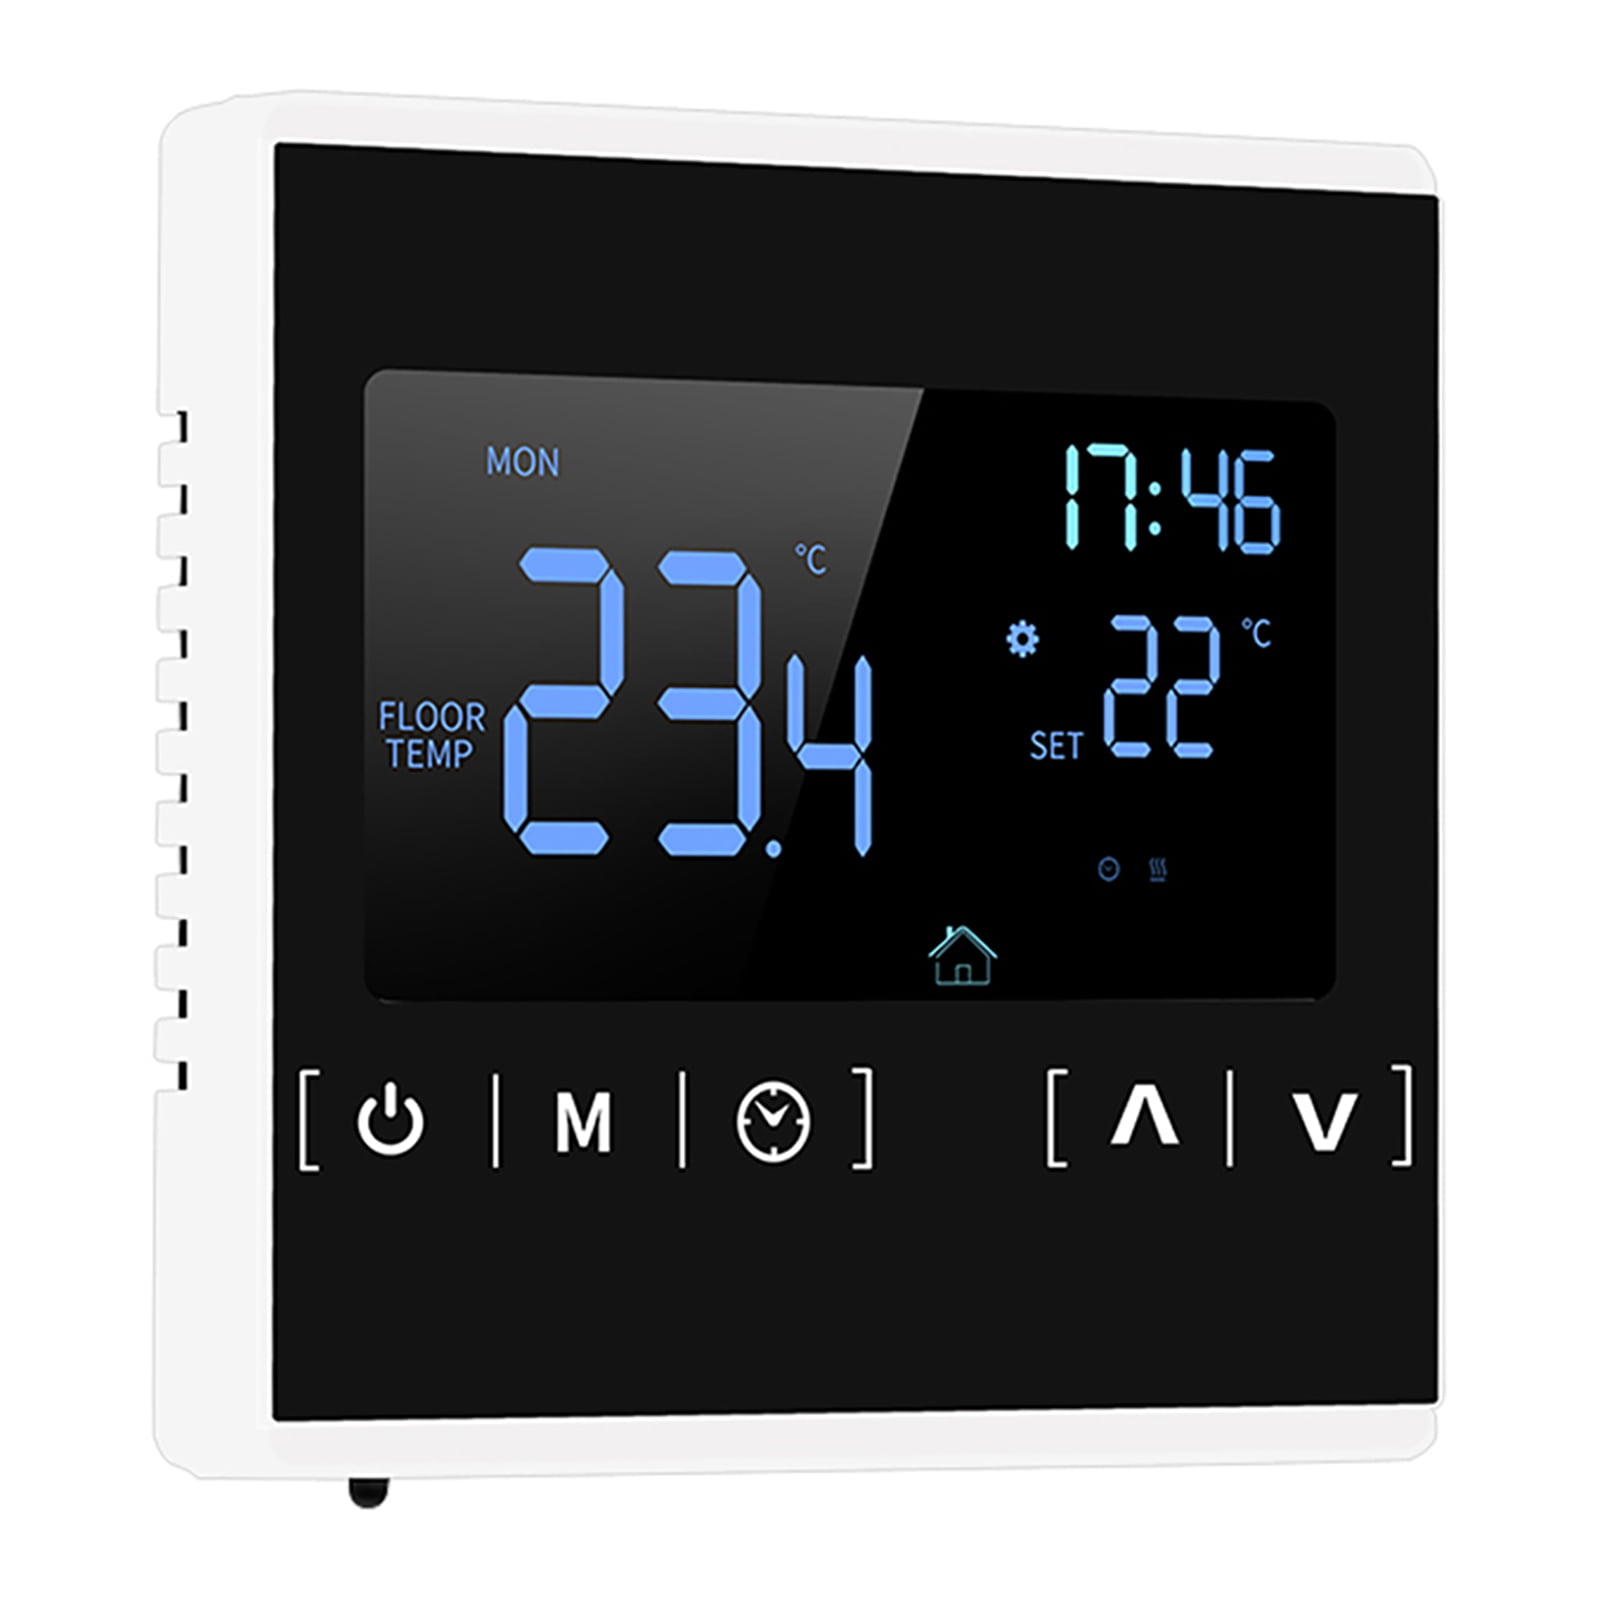 Programmable Touch Screen 7 Day Smart Thermostat Electric Heating Temp Control 